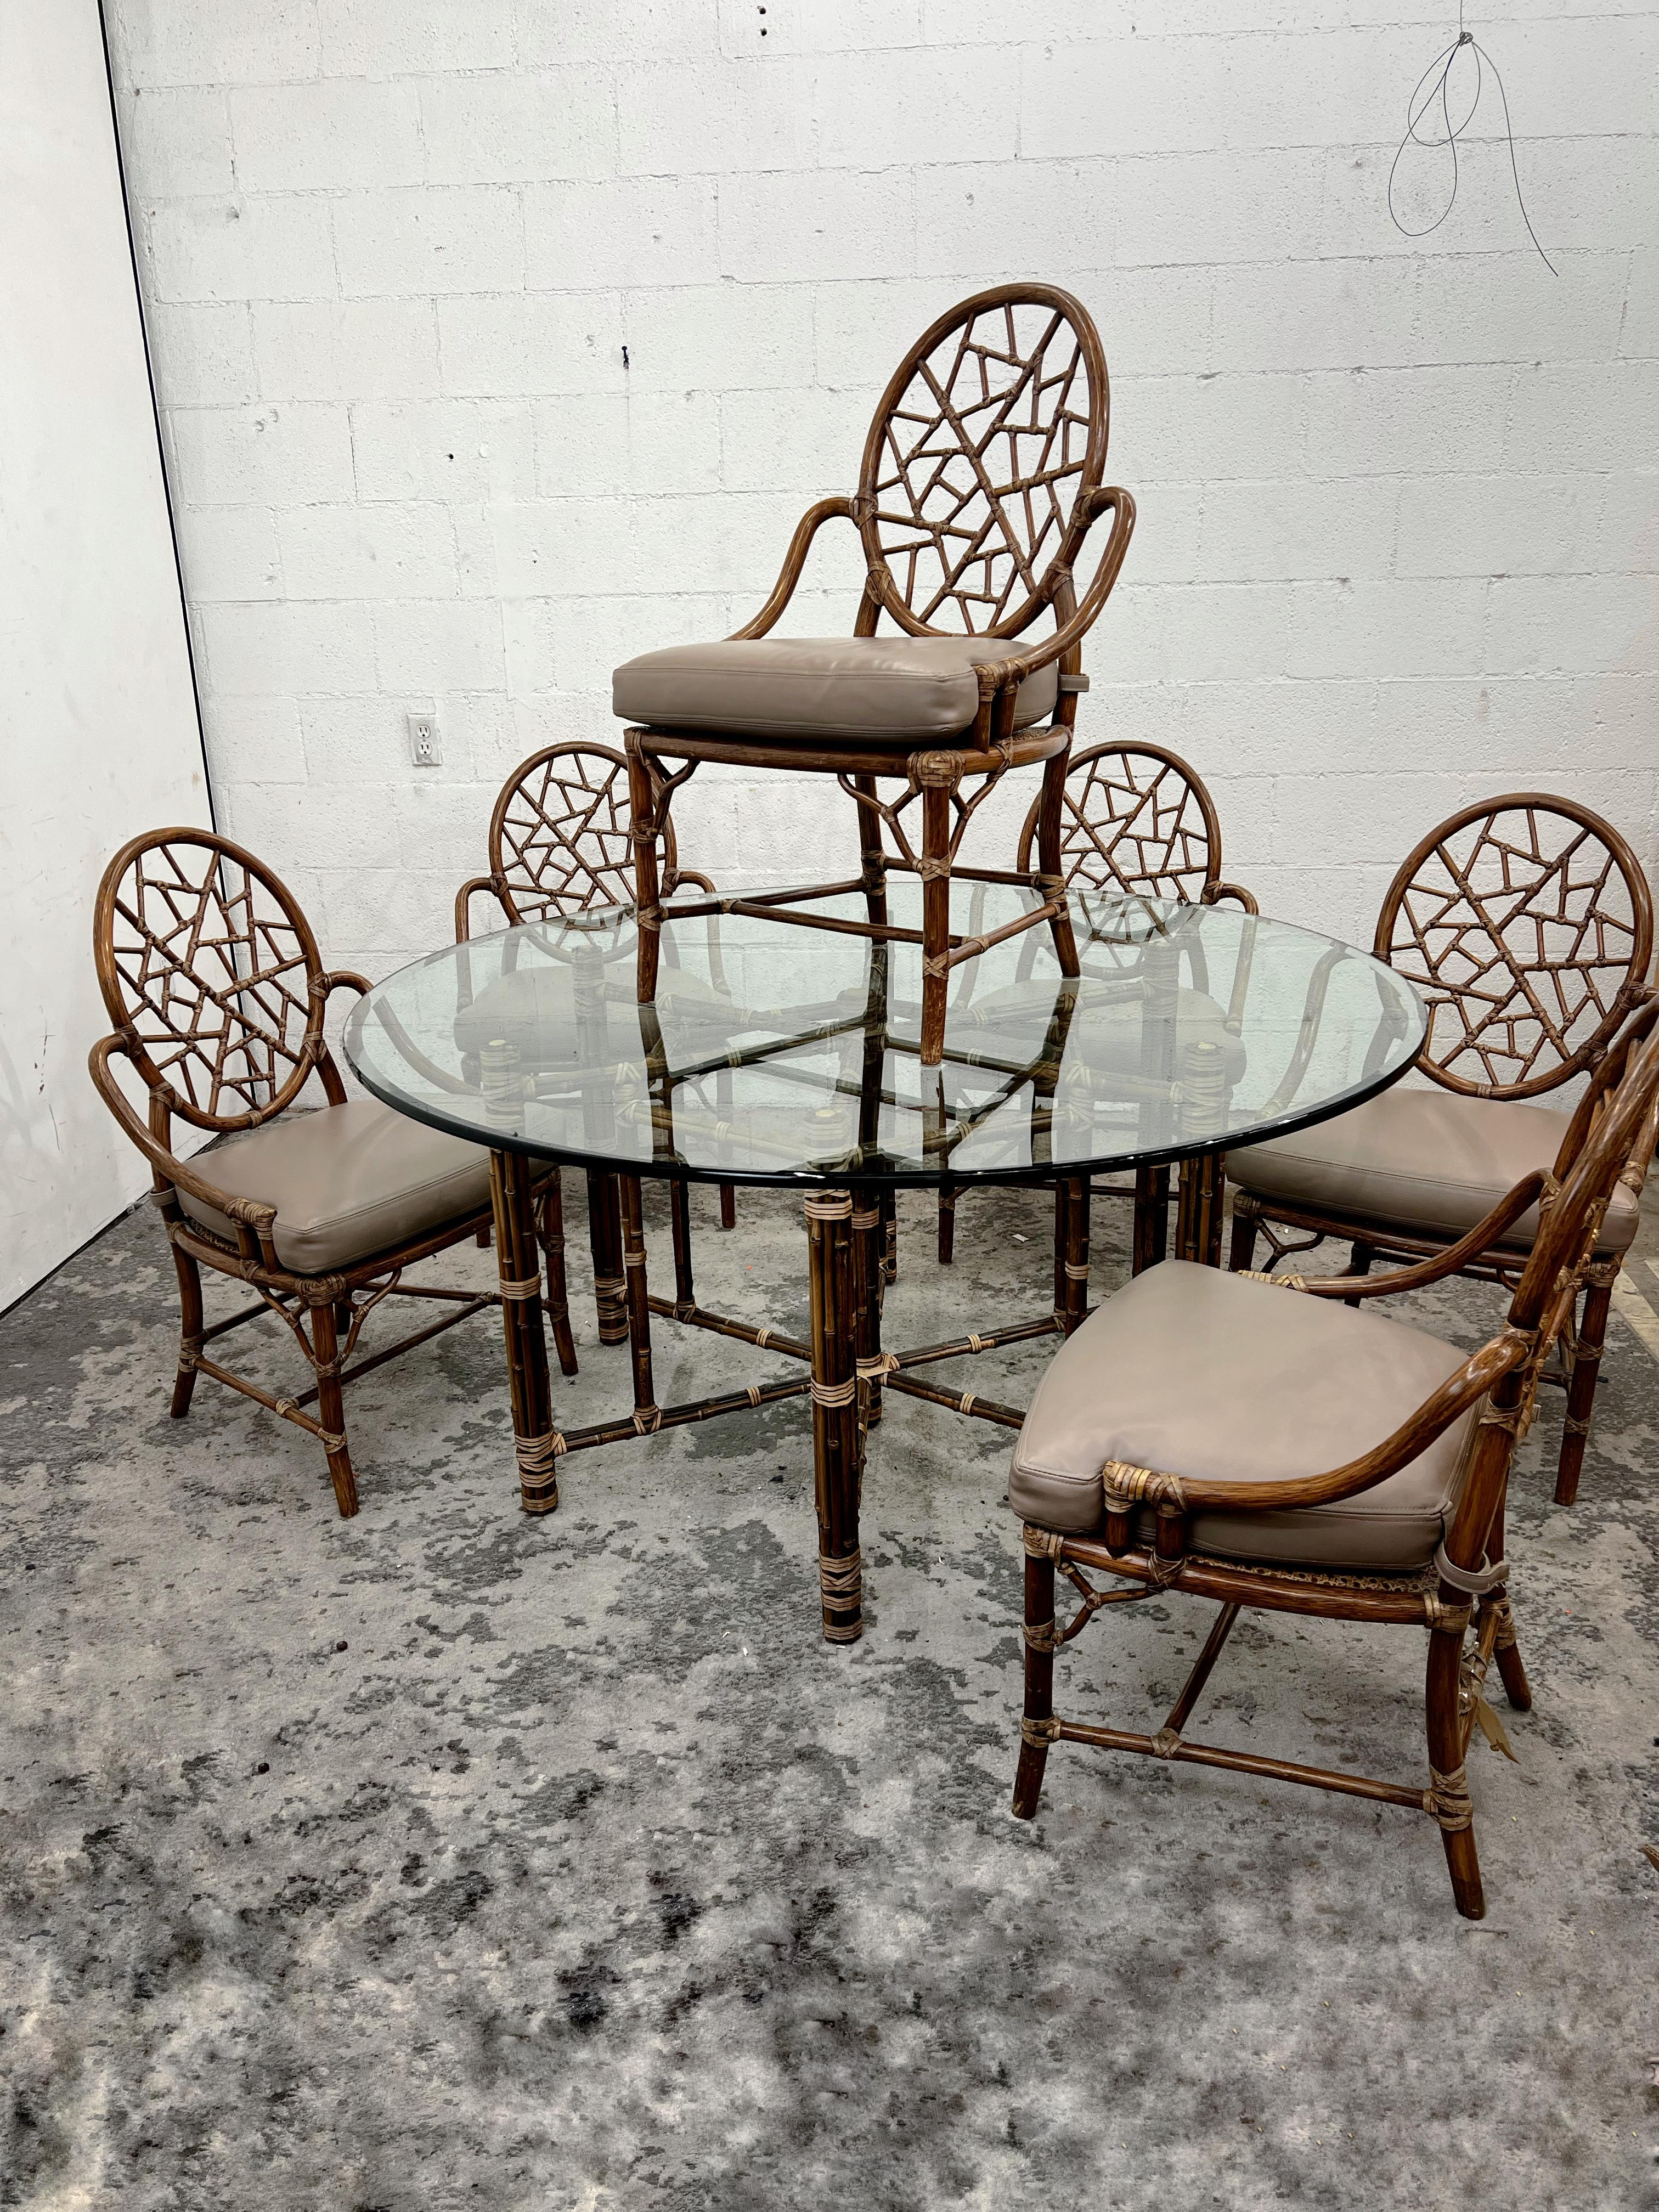 Vintage McGuire dining set, six cracked ice dining chairs and 60” dining table, rattan and bamboo and raw hide

The table was designed by Leonard Linden. 60